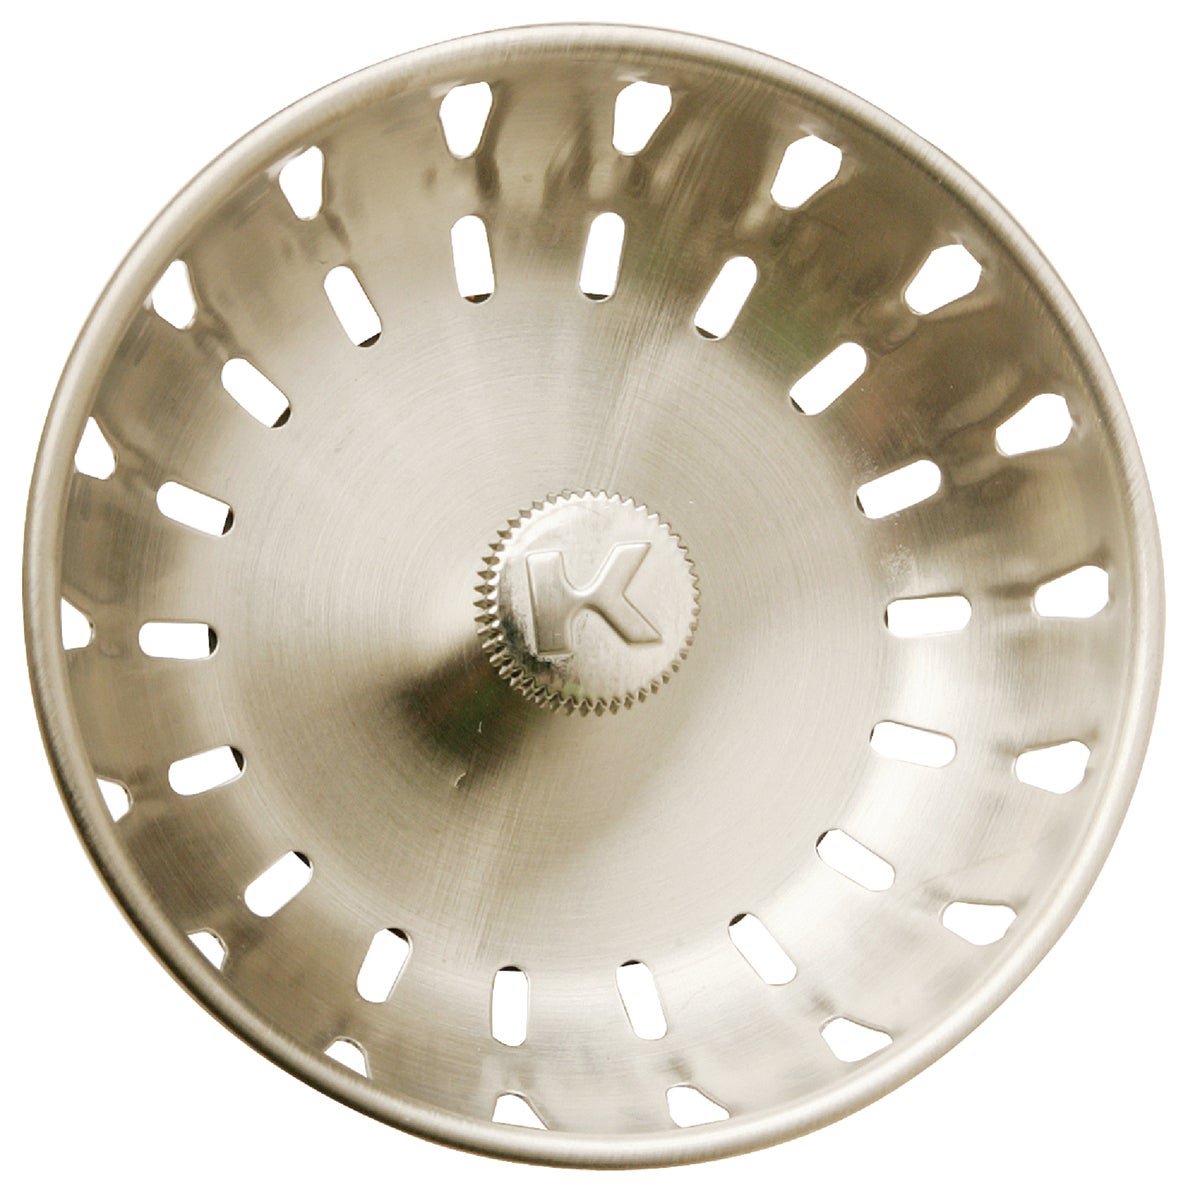 Do it Brushed Nickel Replacement Basket Strainer Cup with Fixed Post